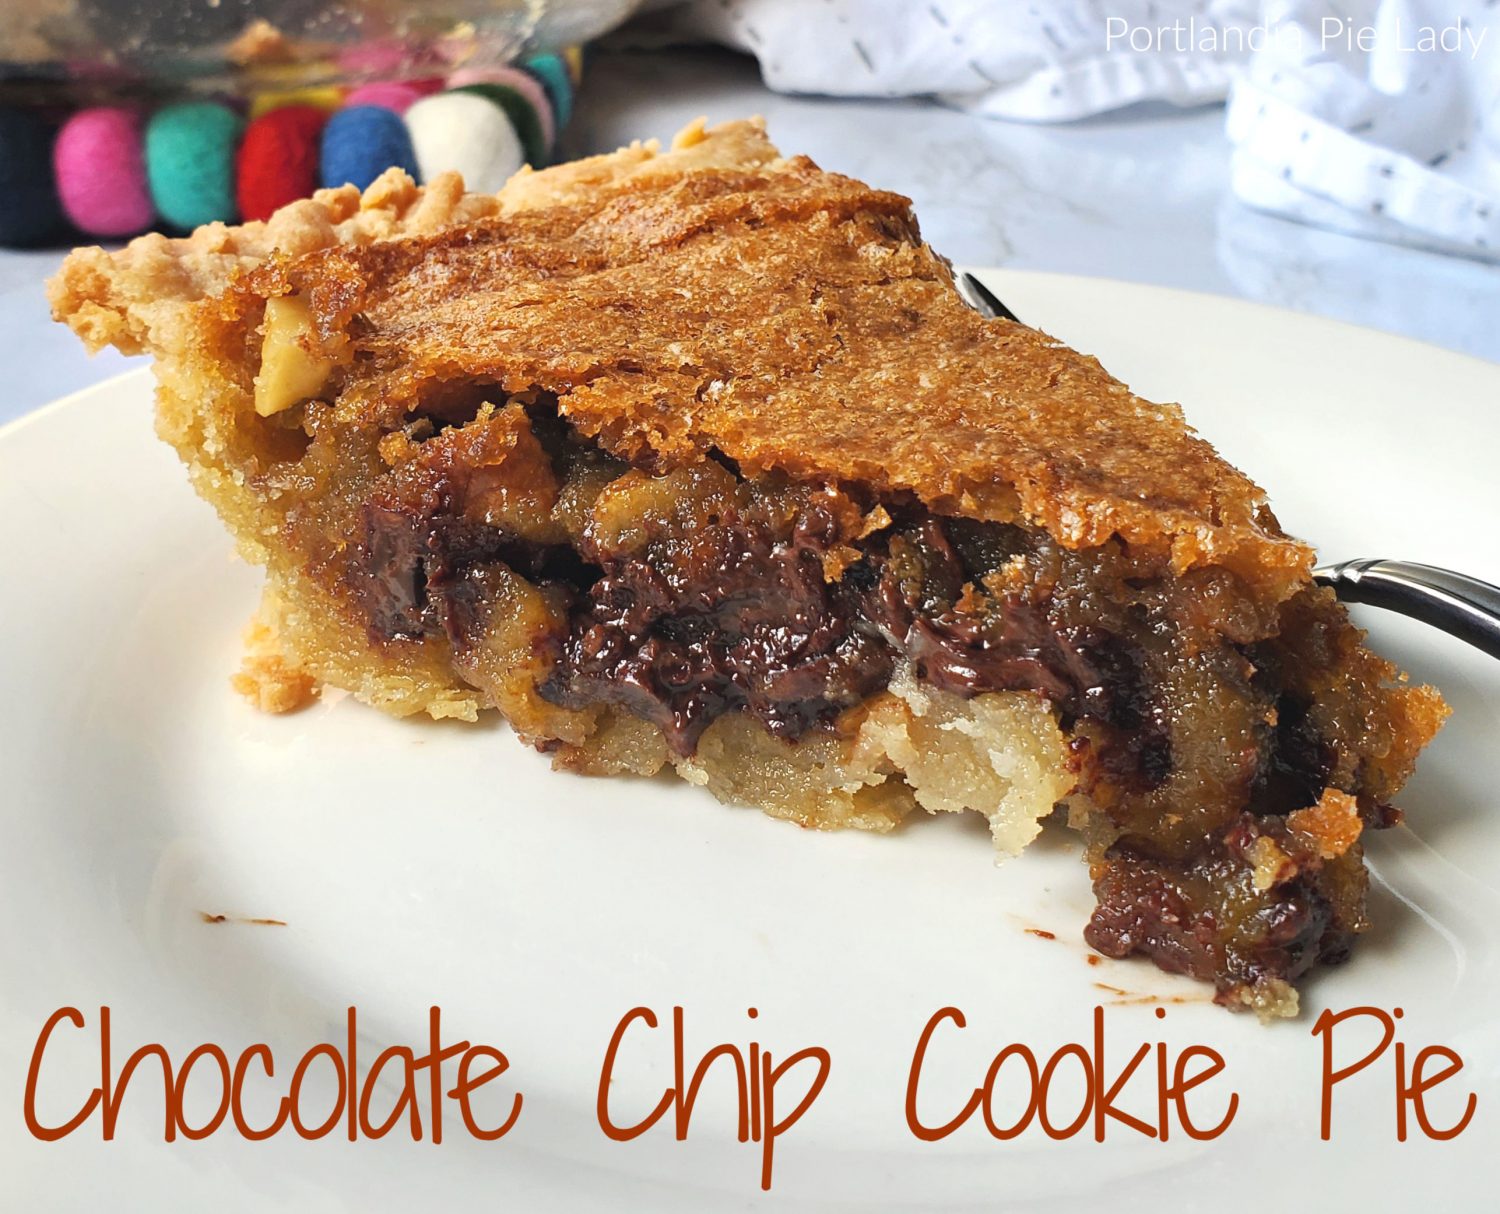 Gooey Chocolate Chip Cookie Batter Pie: Packed full of chocolate, walnuts, and a butter batter creating a gooey luscious filling and buttery flaky crust!